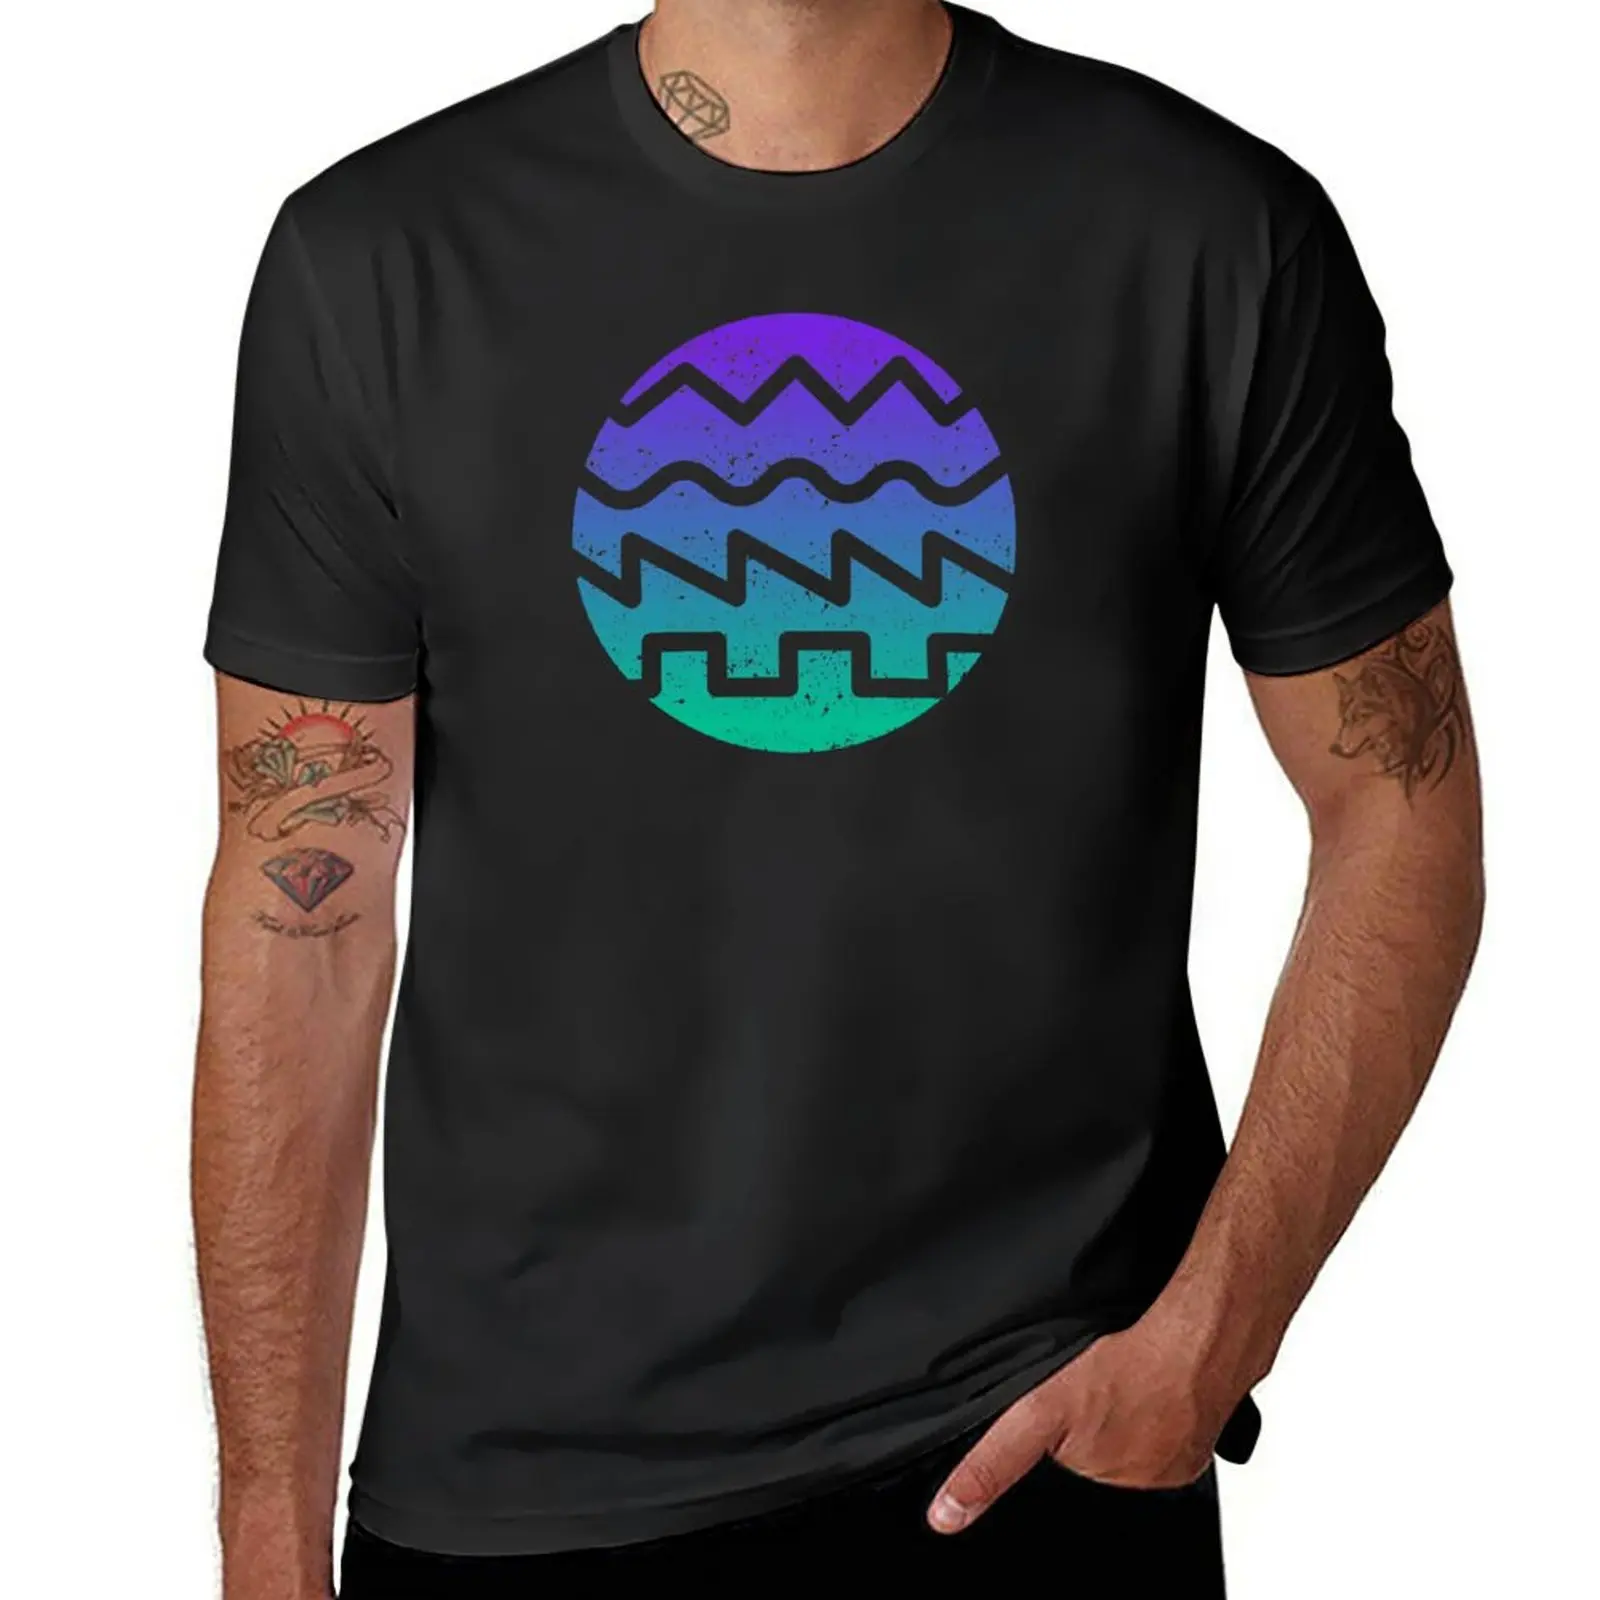 

New Synthesizer Fan Waveform T-Shirt quick-drying t-shirt Blouse cute tops mens vintage t shirts